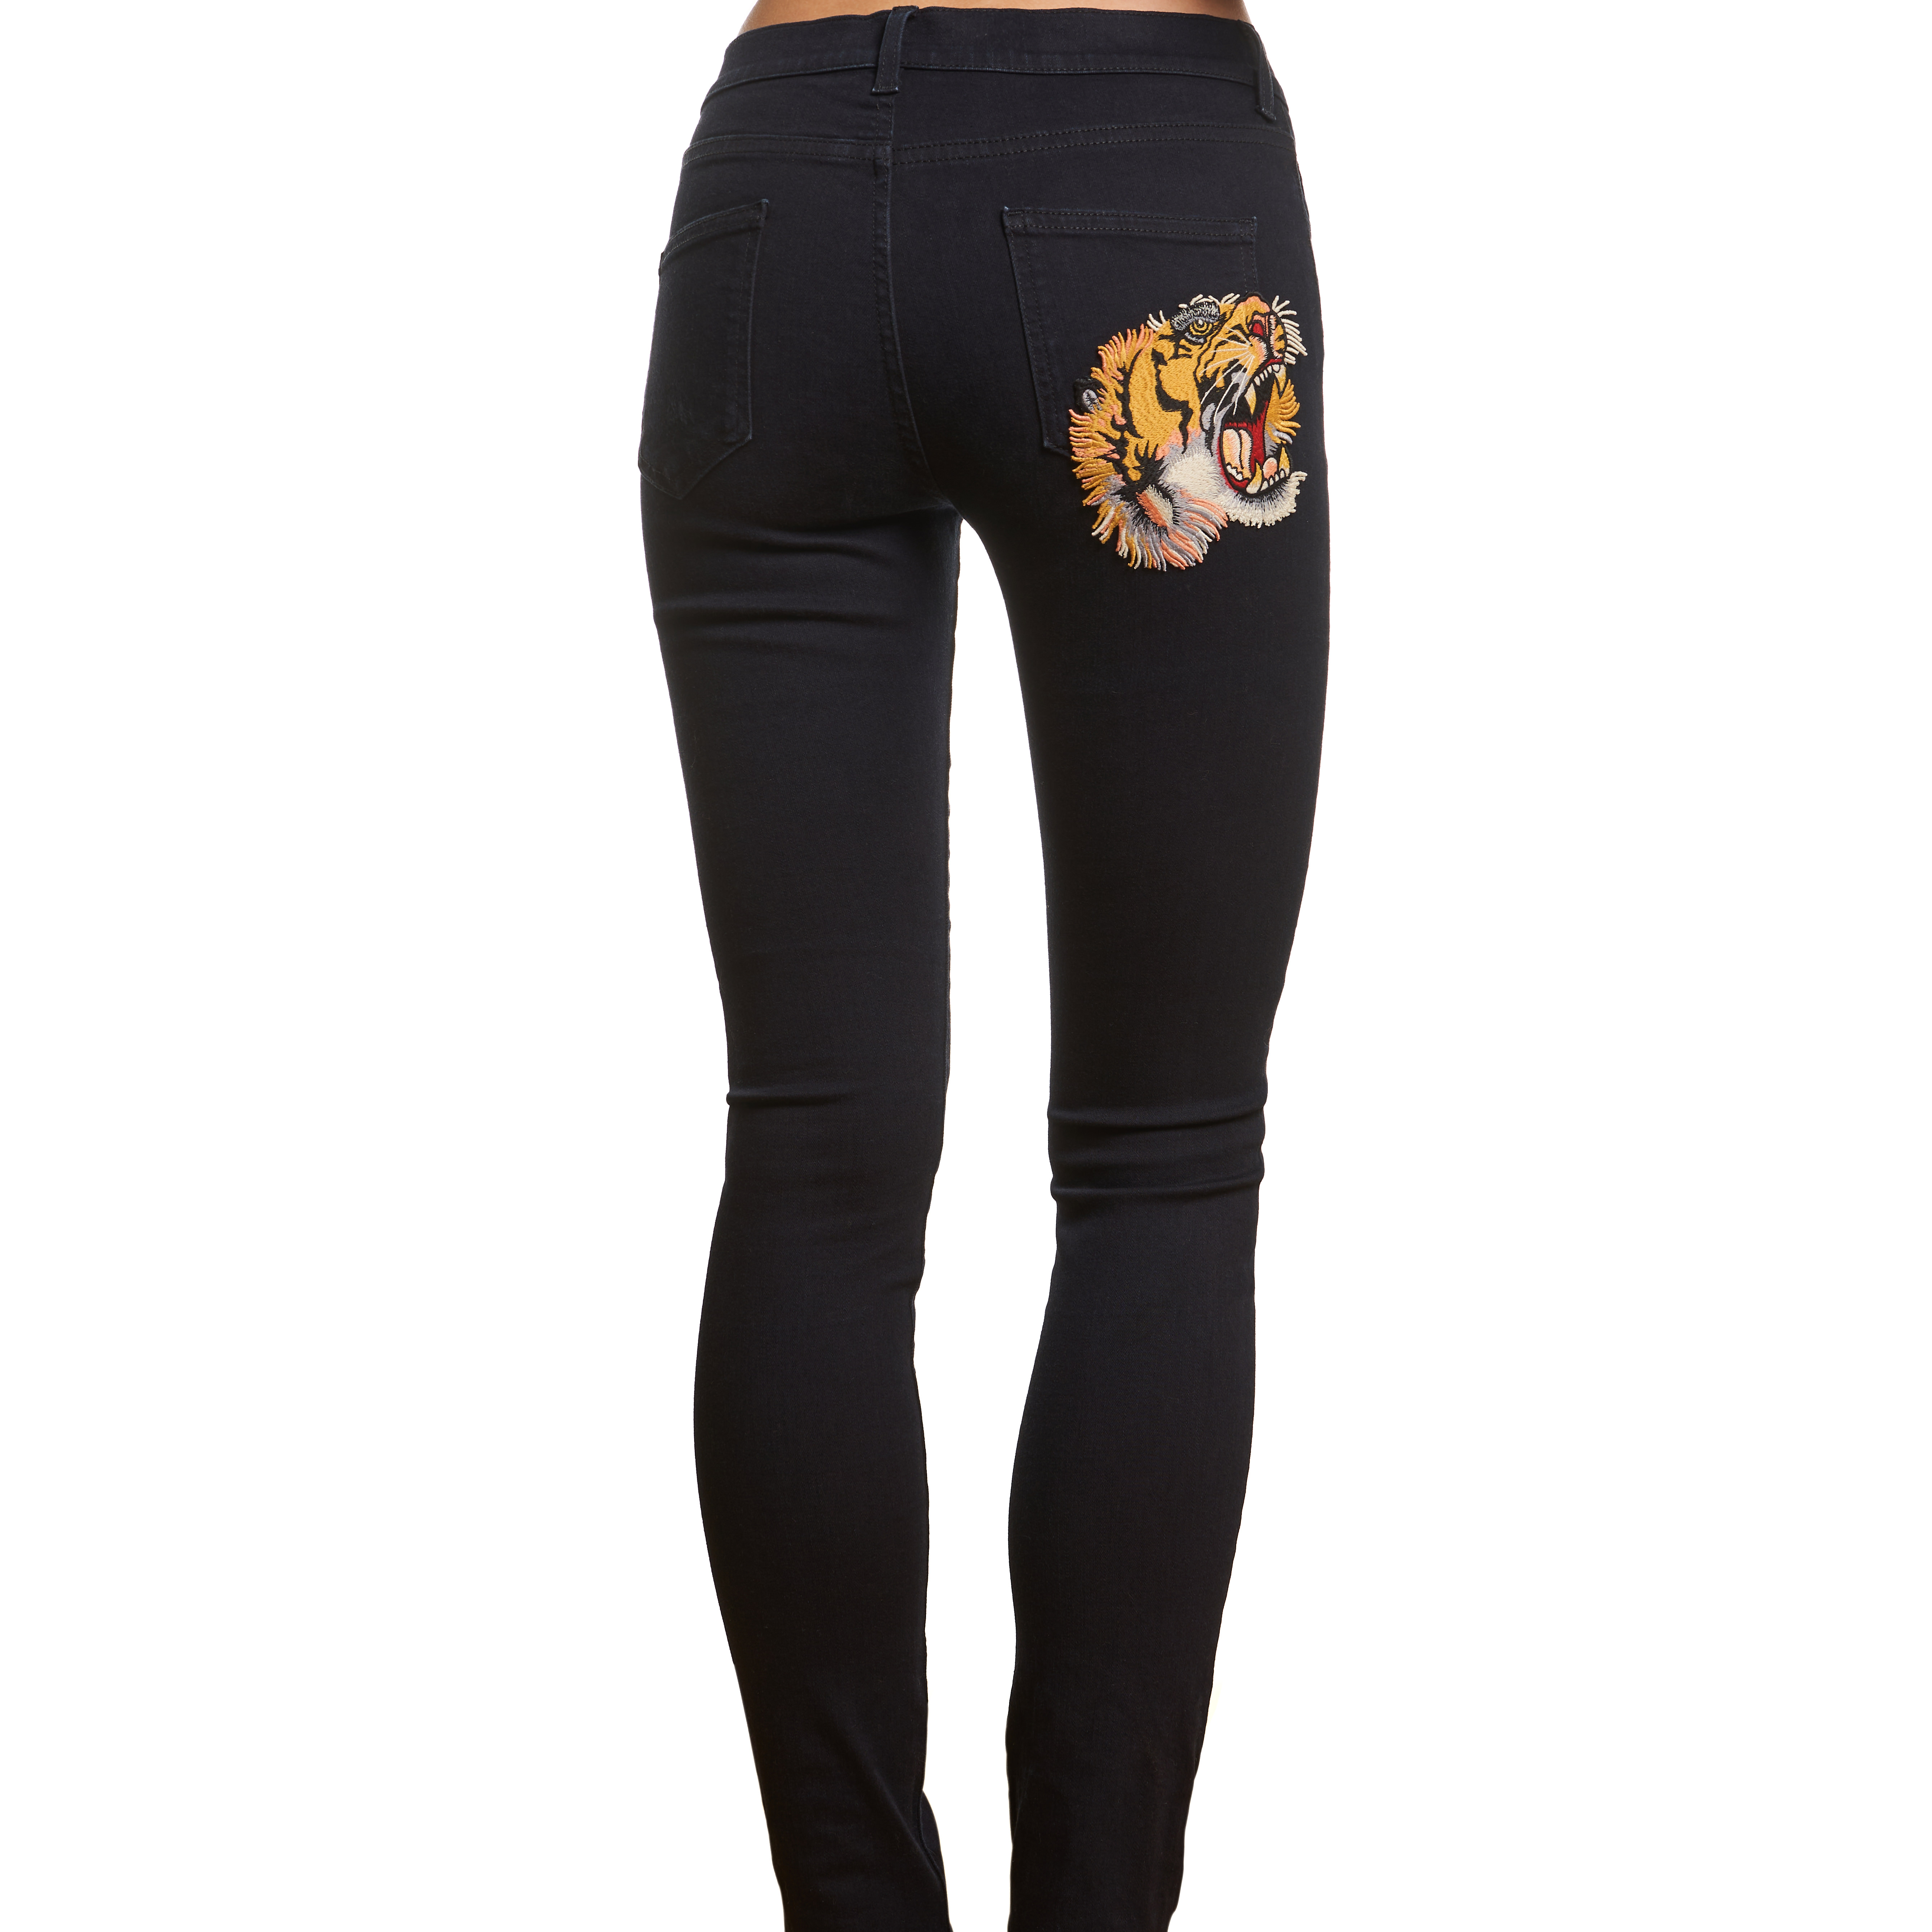 GUCCI TIGER EMBROIDERED SKINNY JEANS Condition grade B. Waist 28, 100cm length. Black skinny ... - Image 2 of 2